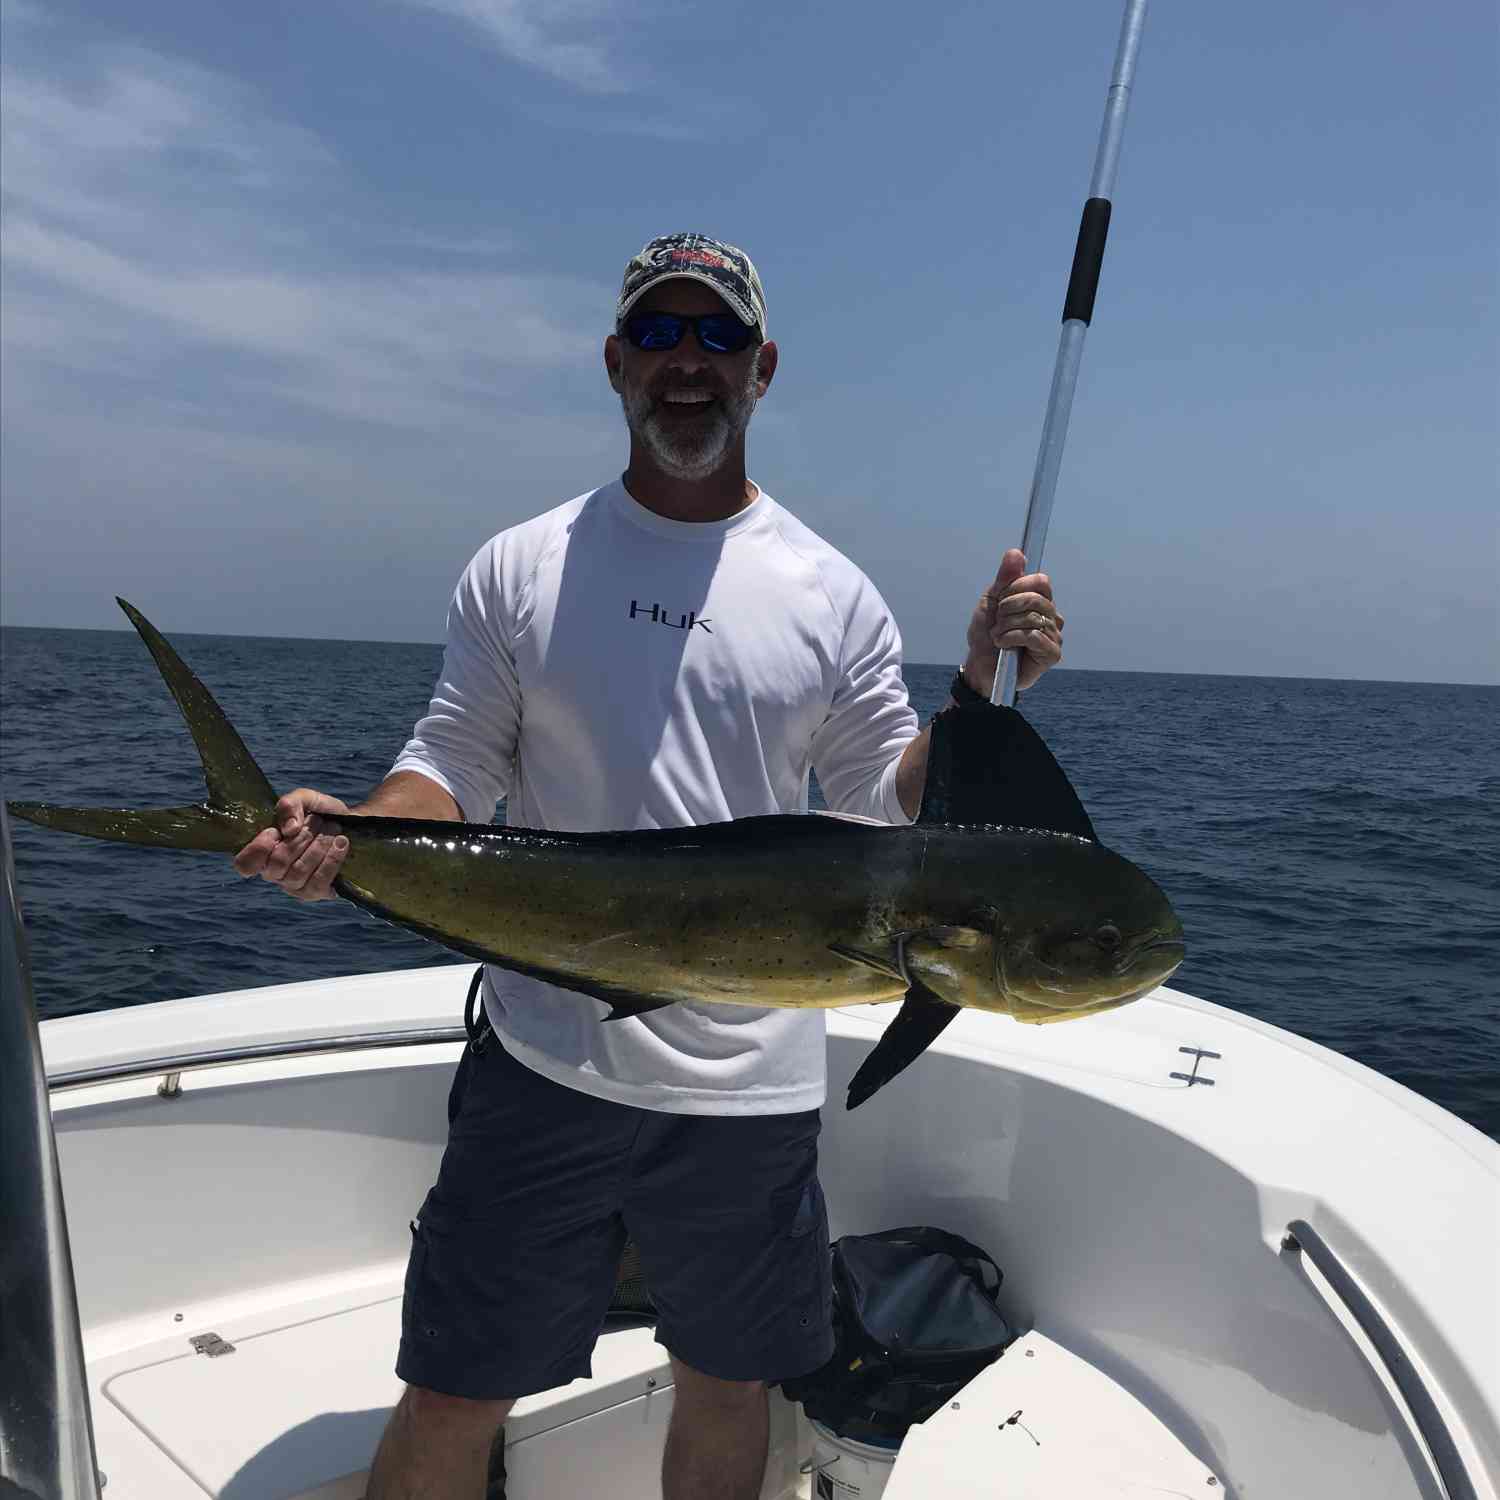 Took my brother and Dad offshore Father’s Day weekend. We caught King’s, Spanish, Bonita, barracuda, and mahi. All had fun...